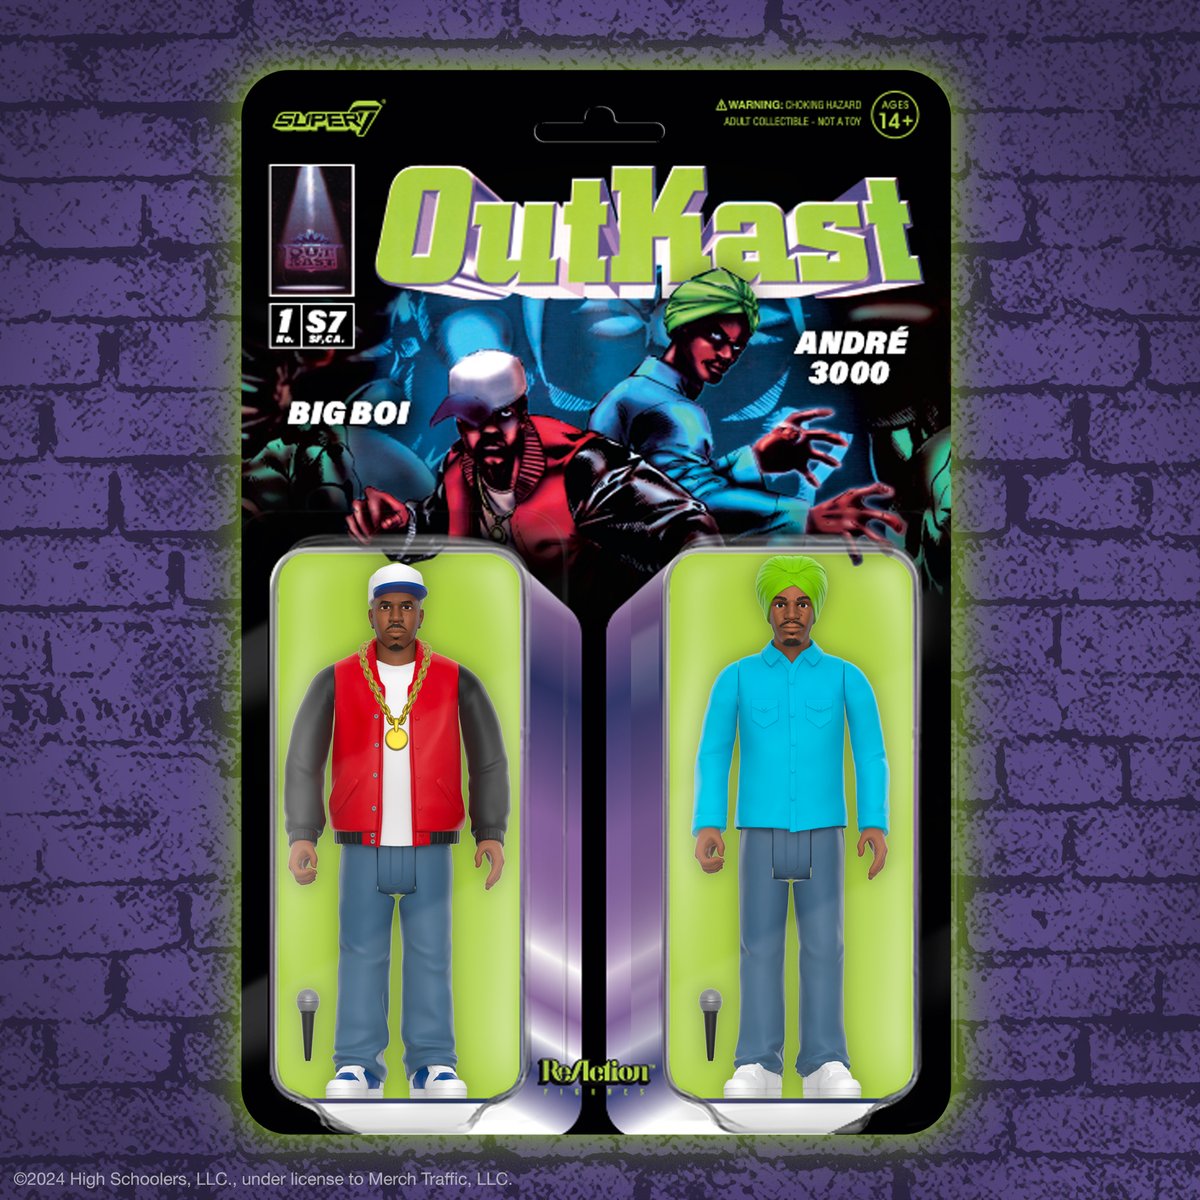 The Southern Players have arrived! This 2-pack of OutKast ReAction Figures is inspired by the cover art from the iconic duo’s second studio album, “ATLiens”. Available now at Super7.com! #Super7 #OutKast